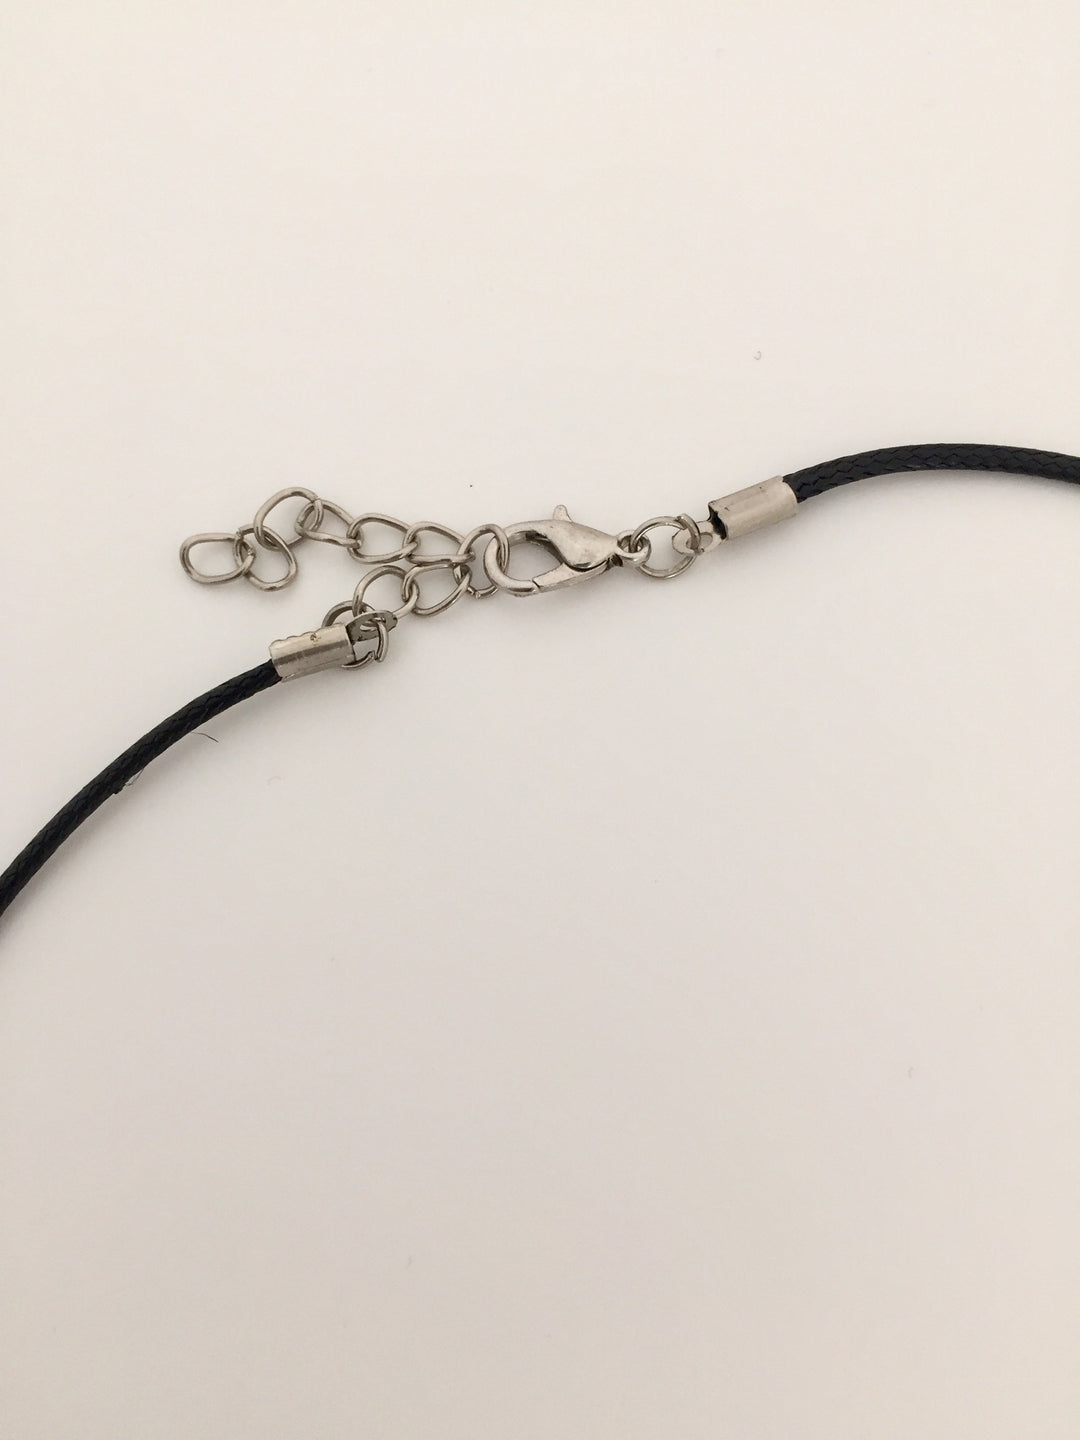 Clasp of black leather necklace